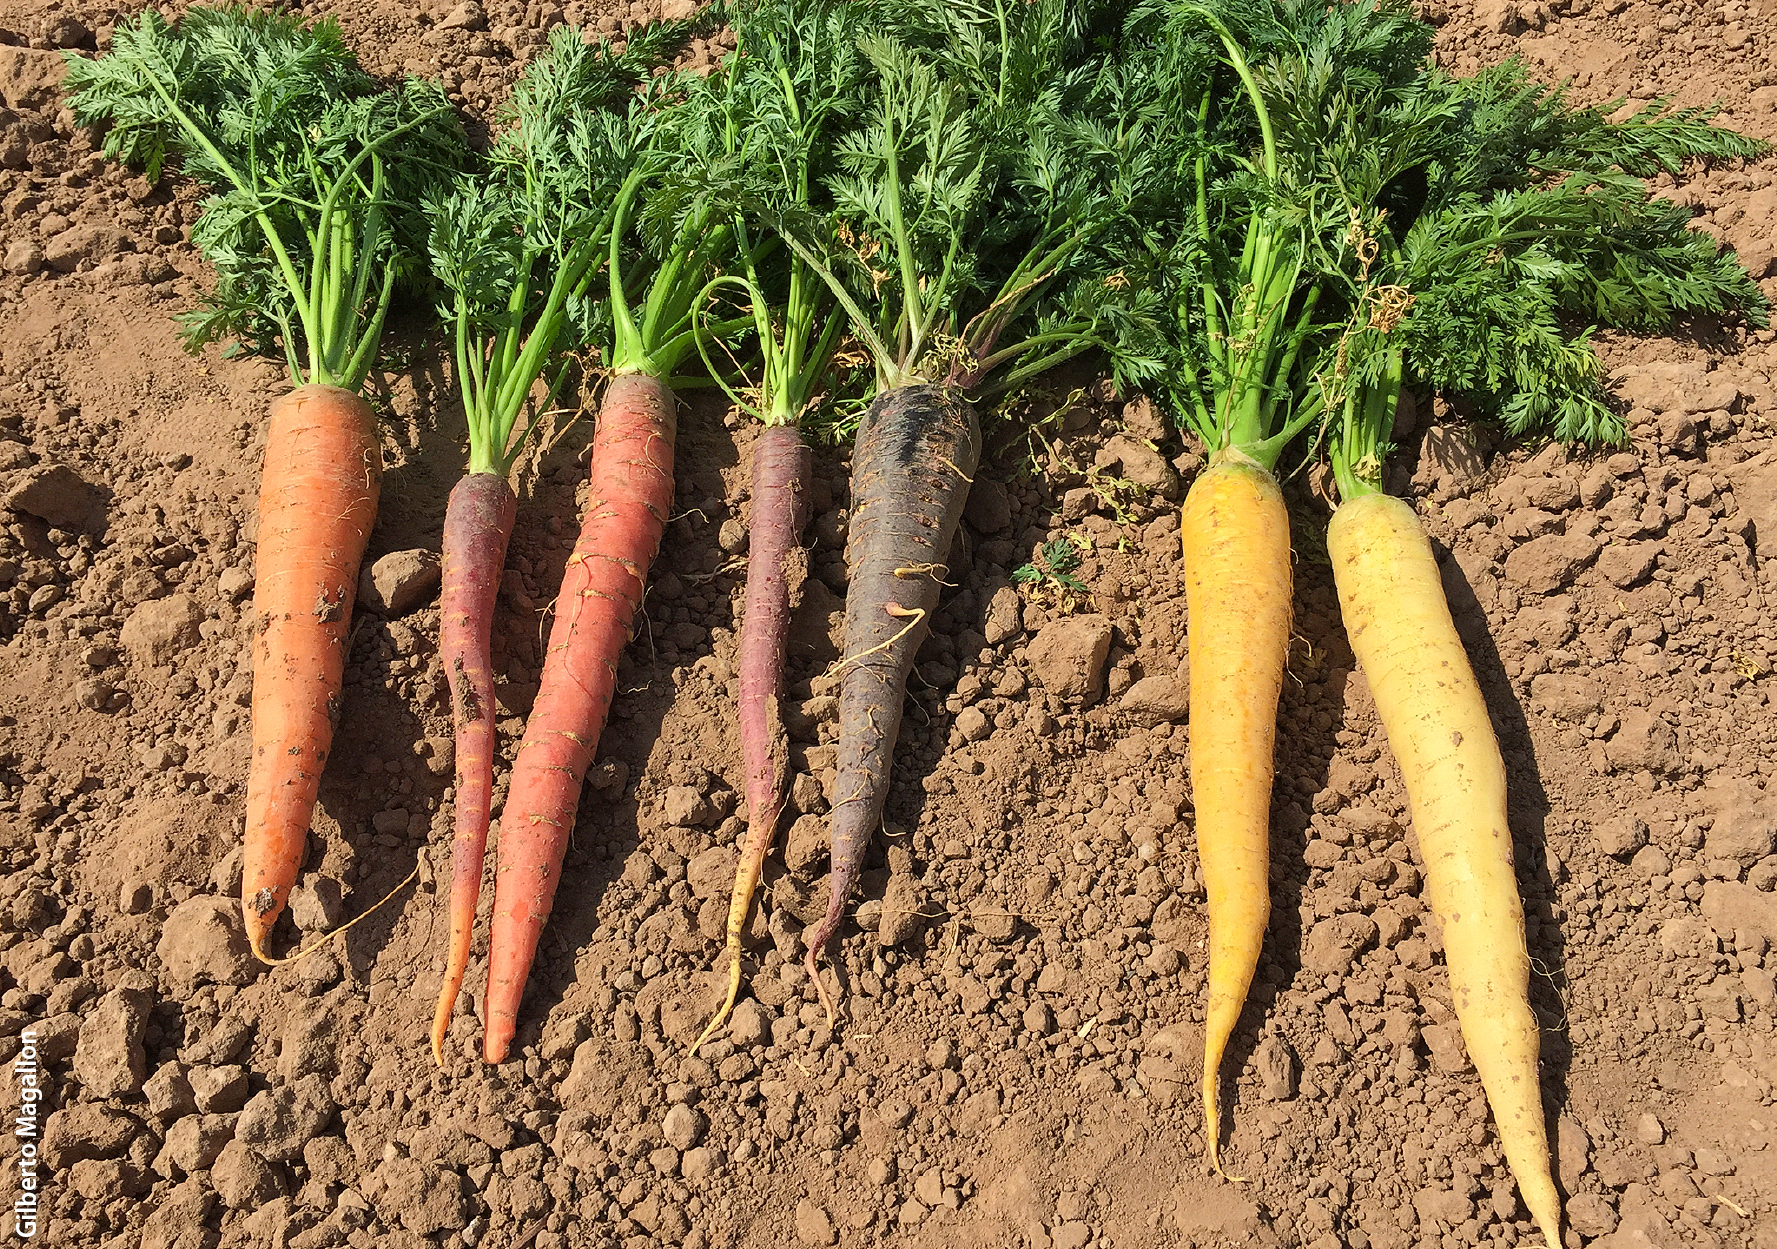 The carrot breeding program at Desert REC will be part of a major effort to identify potentially useful genetic material among the roughly 700 carrot varieties maintained in the USDA germplasm collection in Ames, Iowa.